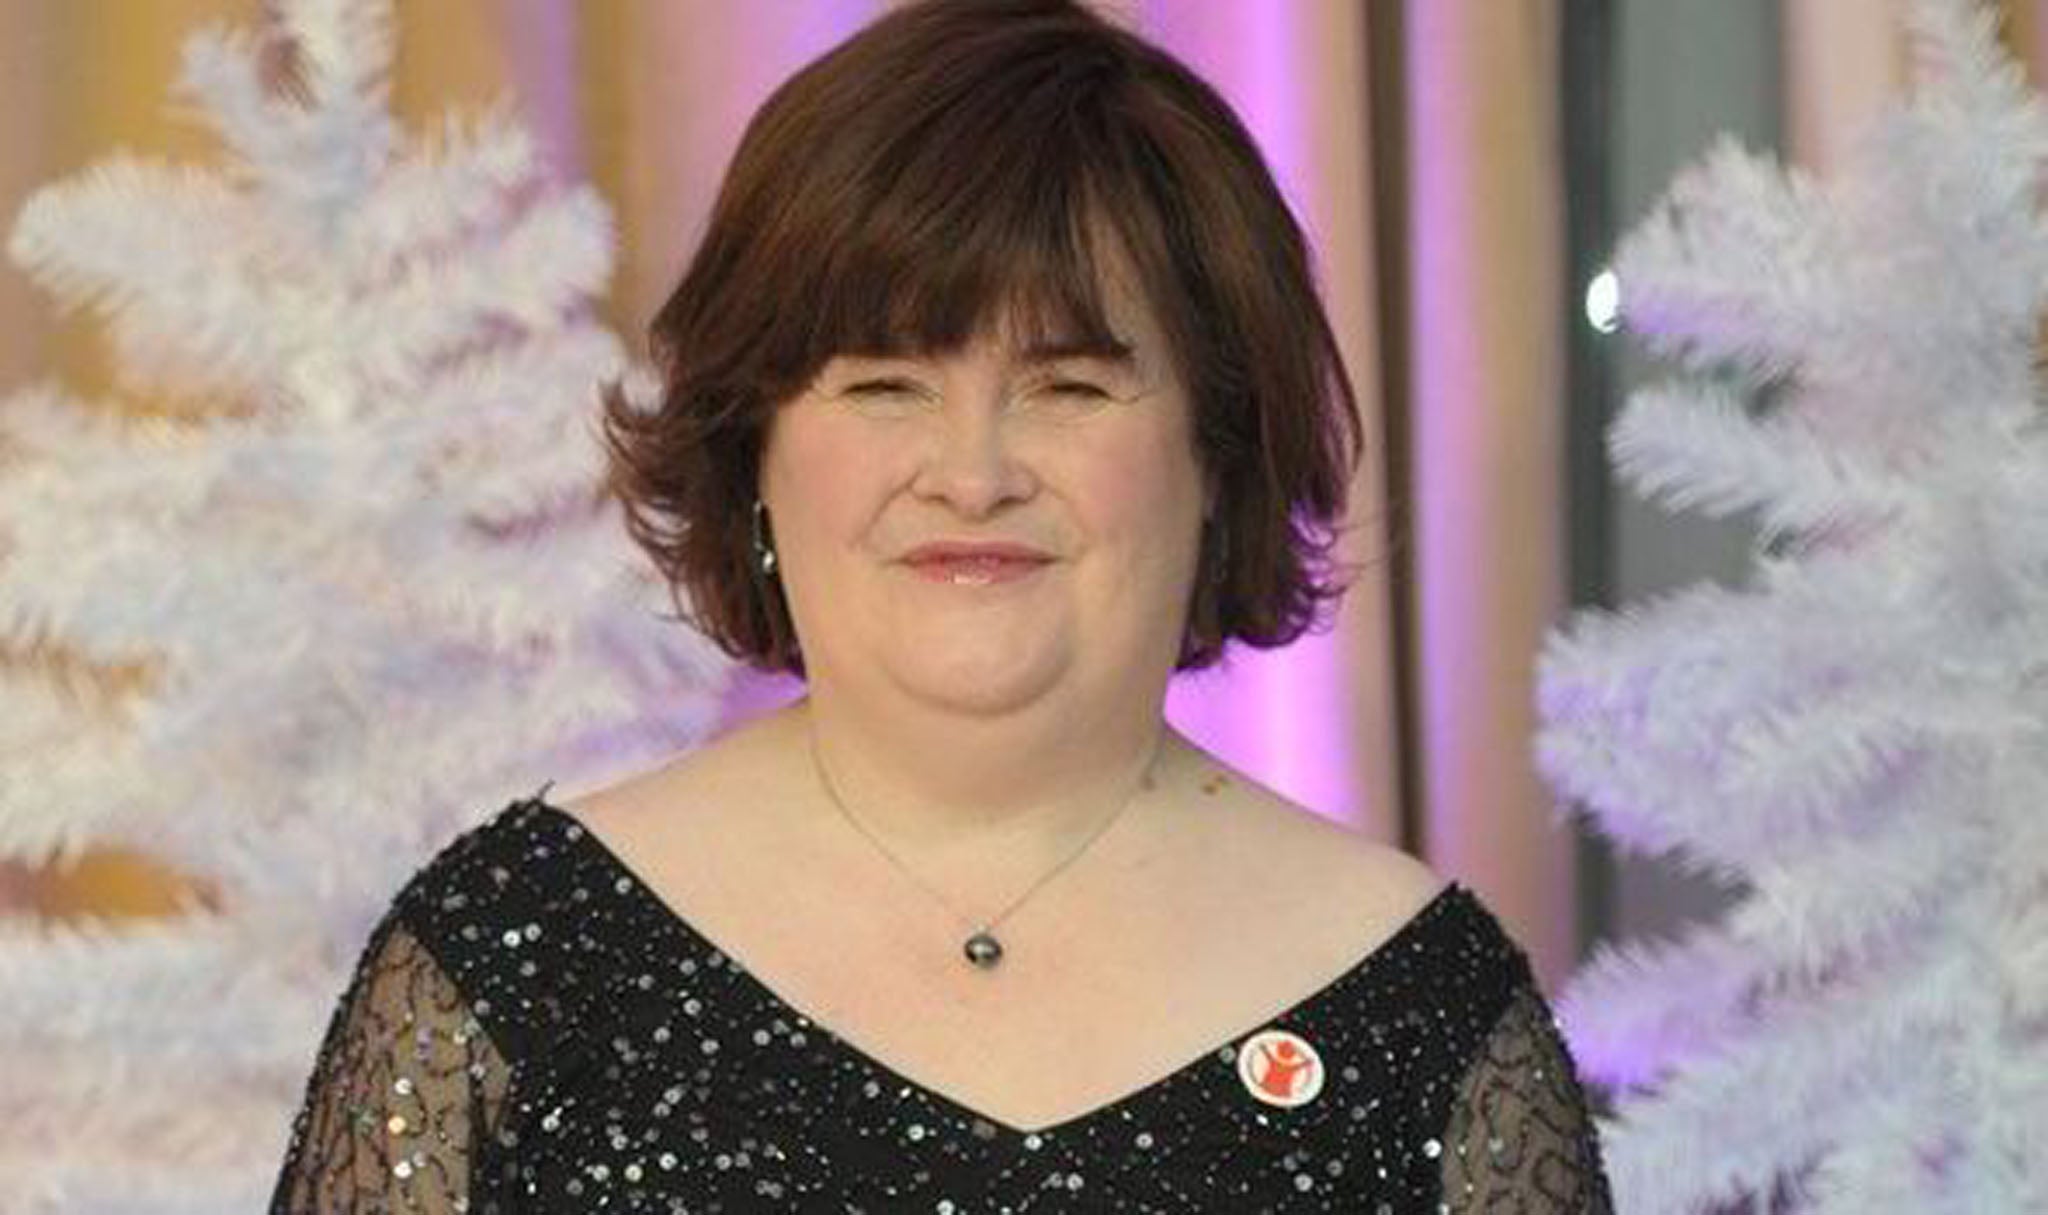 Susan Boyle announces her Christmas single with Elvis Presley at a press conference